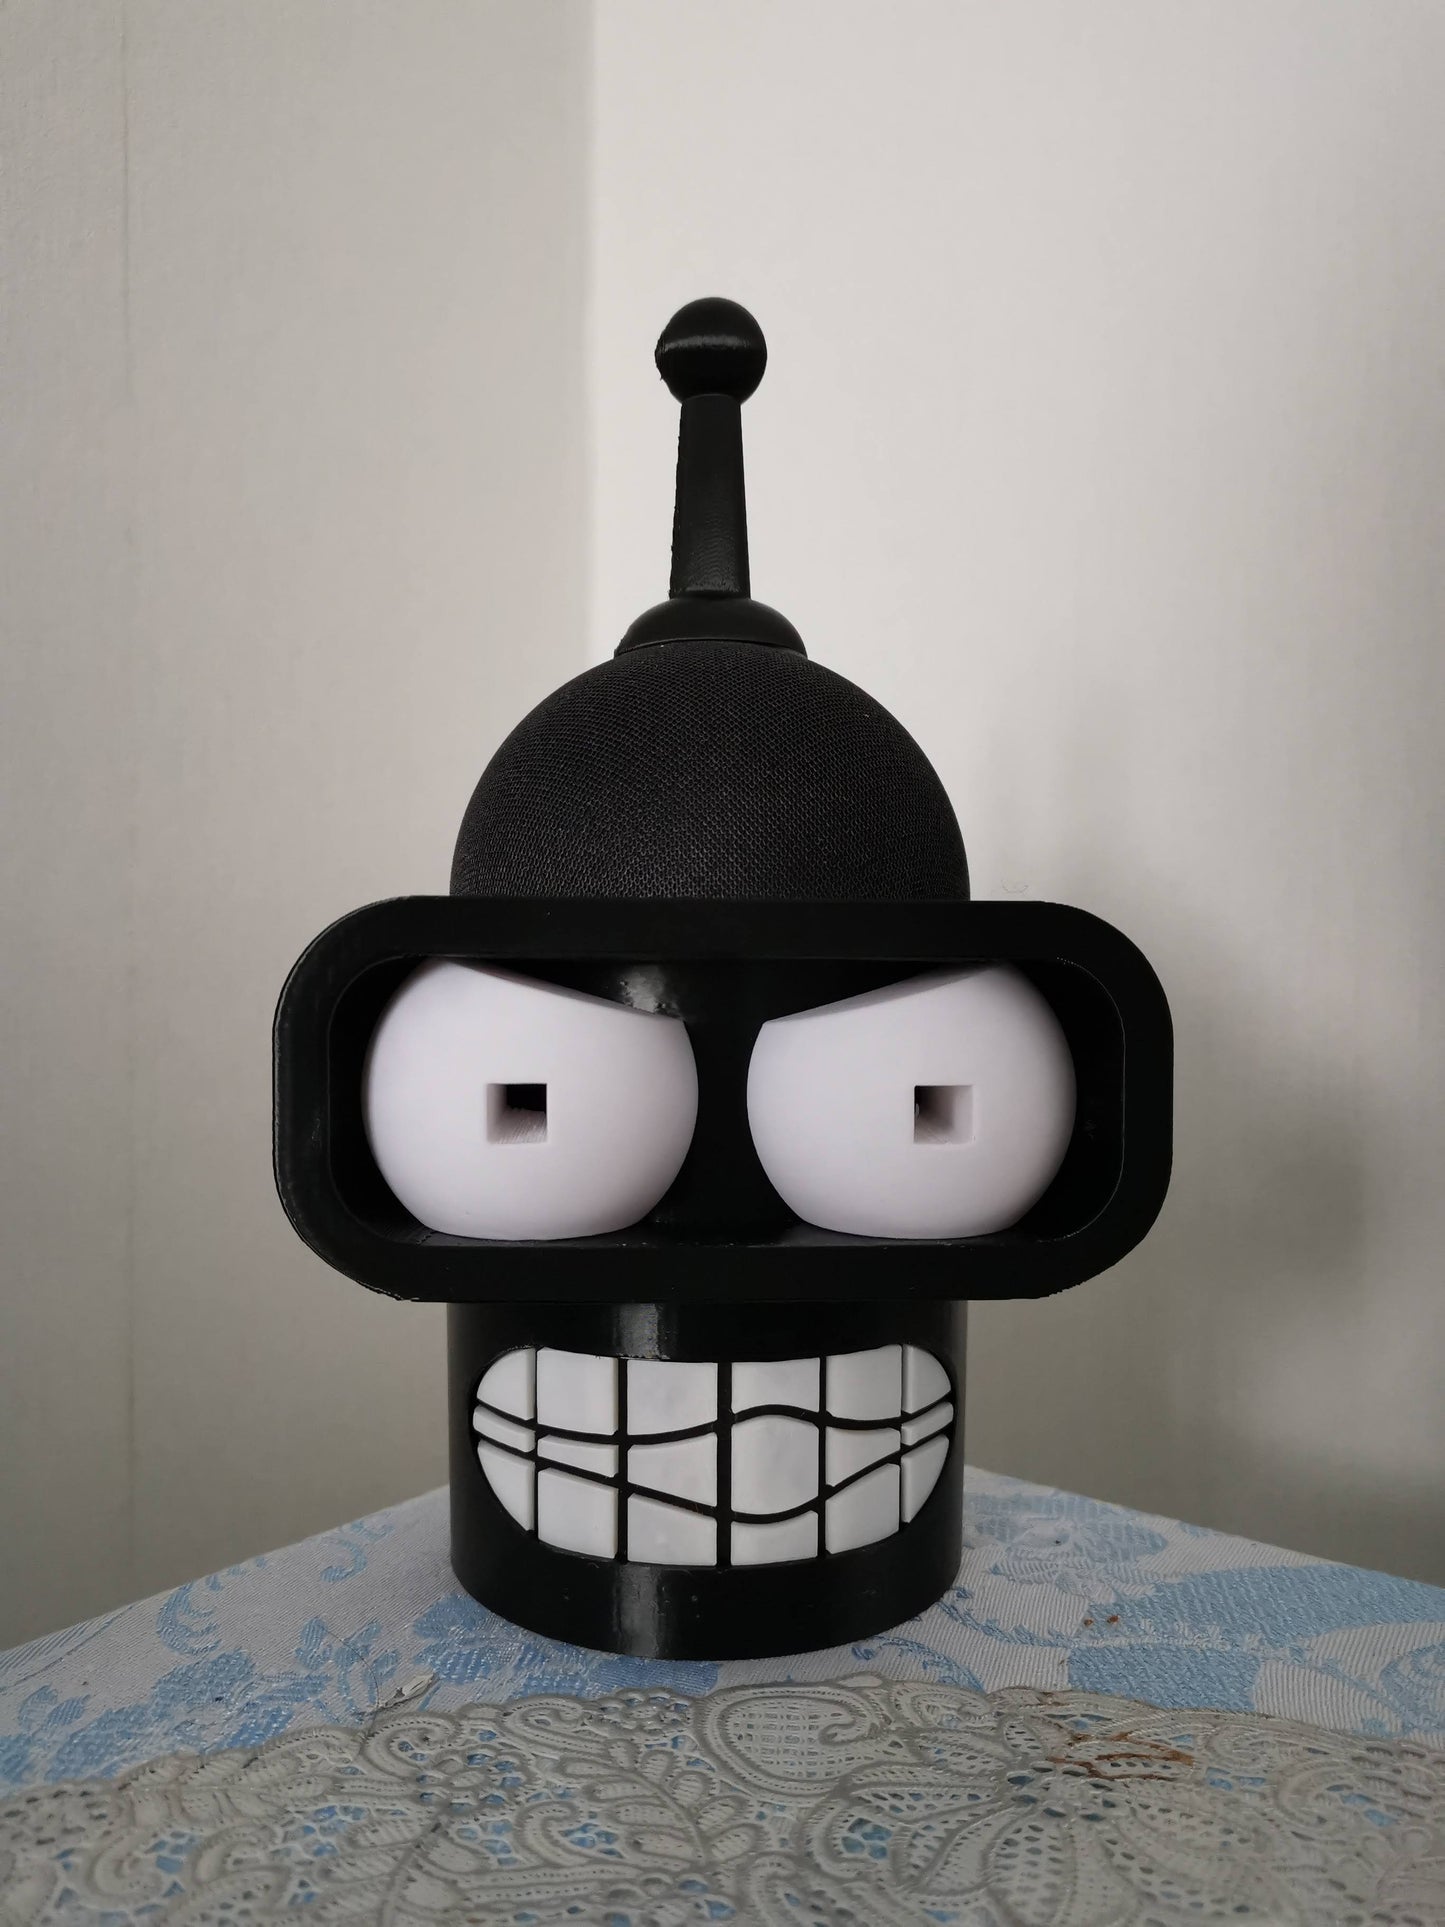 Bender Alexa Echo holder from the front close up (in black)